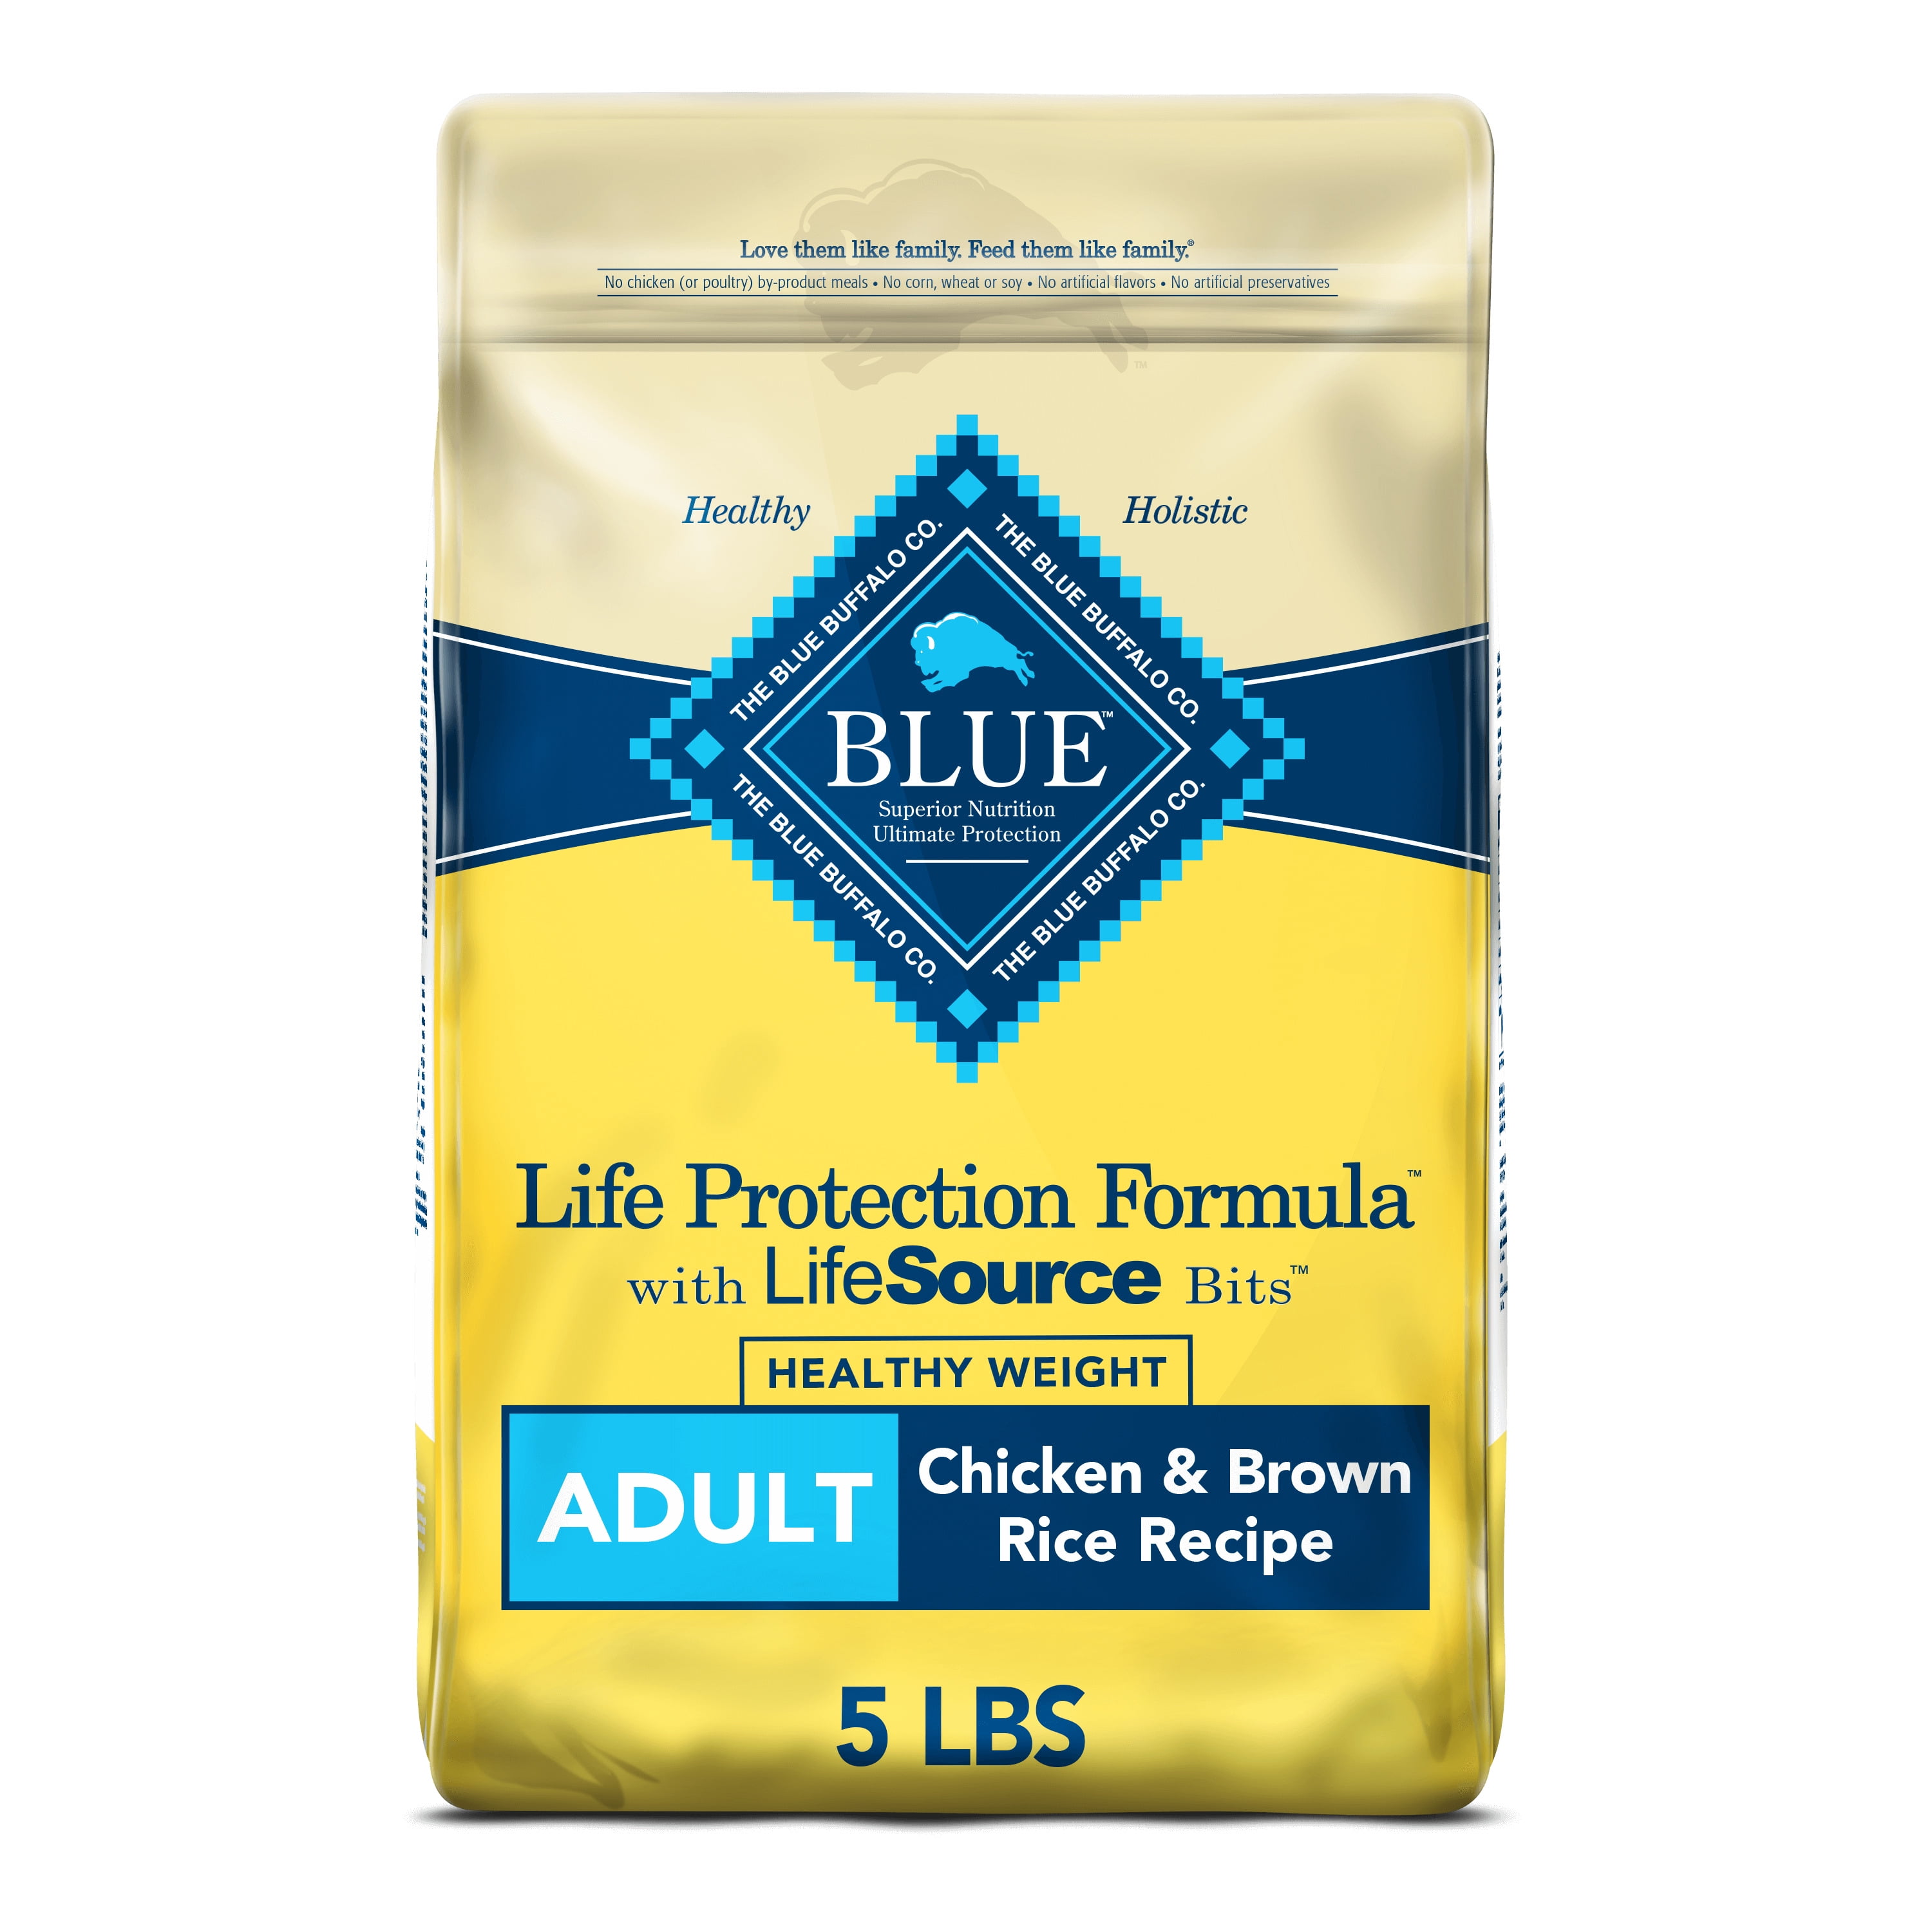 Blue Buffalo Life Protection Formula Healthy Weight Chicken and Brown Rice Dry Dog Food for Adult Dogs, Whole Grain, 5 lb. Bag